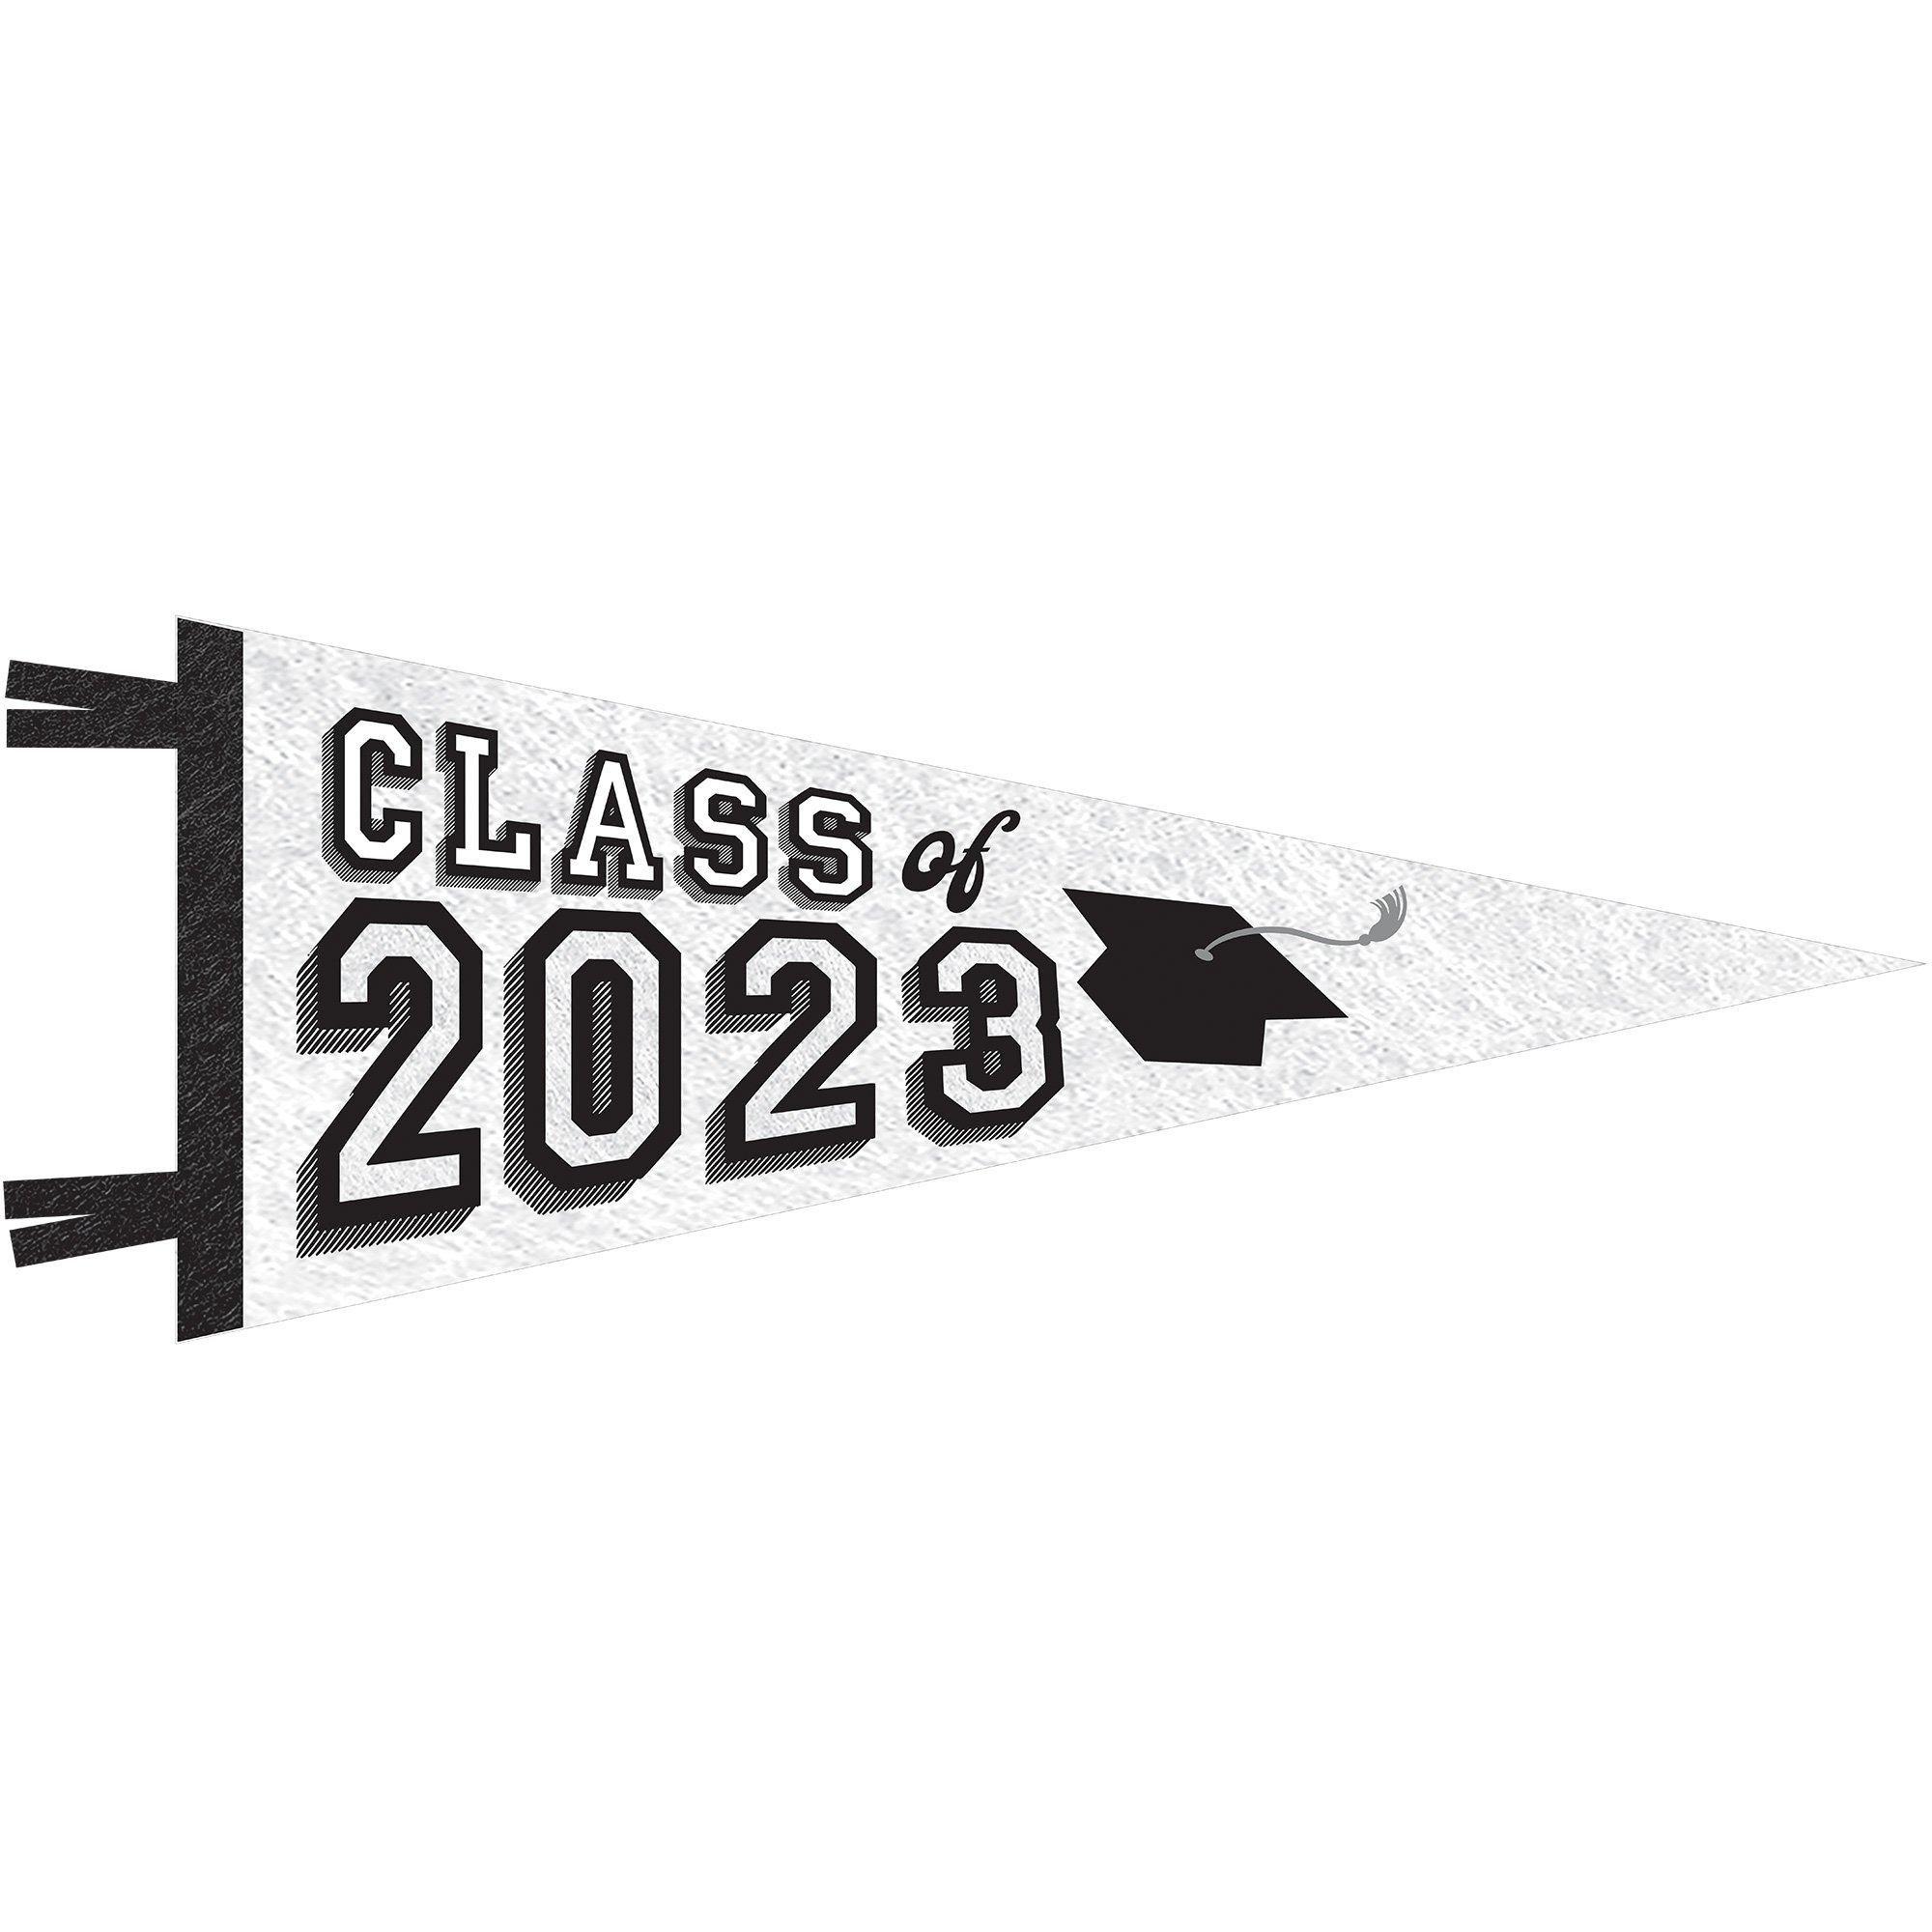 Graduation Party Outdoor Decorations Kit with Banners, Balloons, Yard Signs - Orange 2024 Congrats Grad